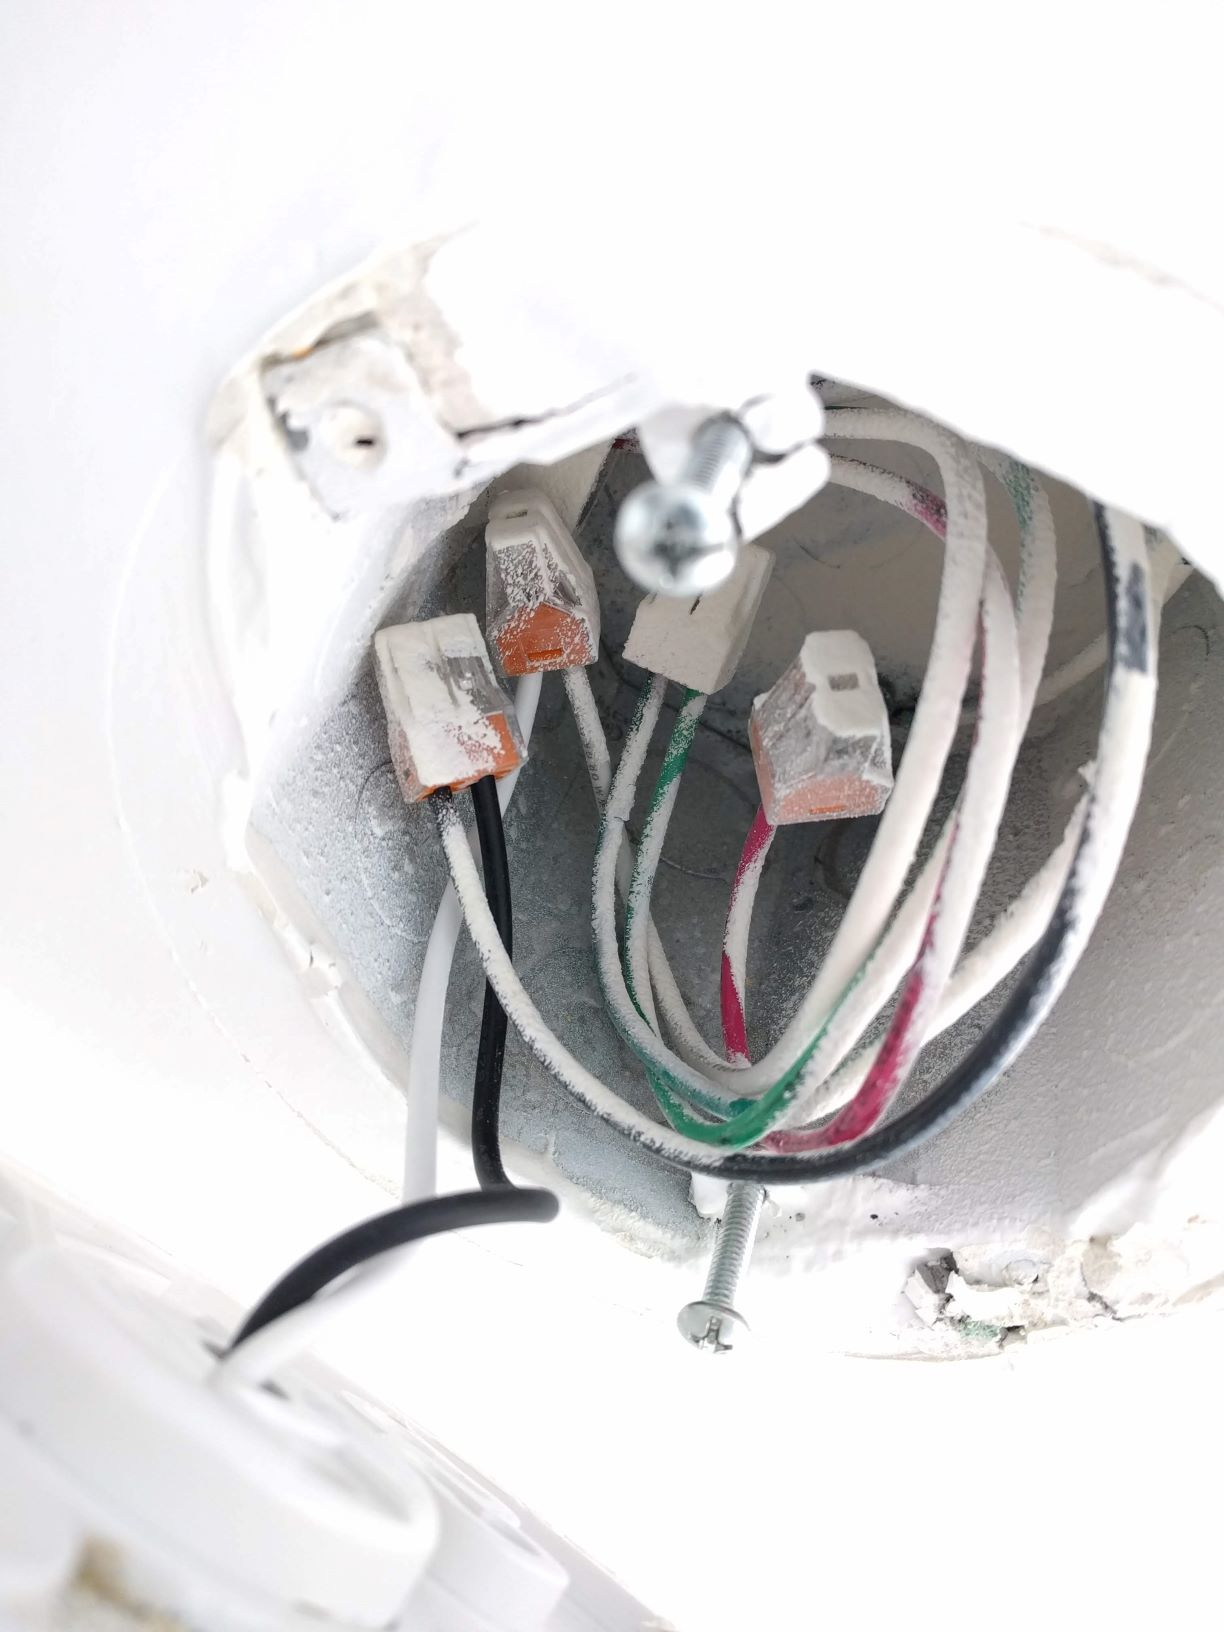 Wiring A Ceiling Fan With Black White Red Green In within size 1224 X 1632